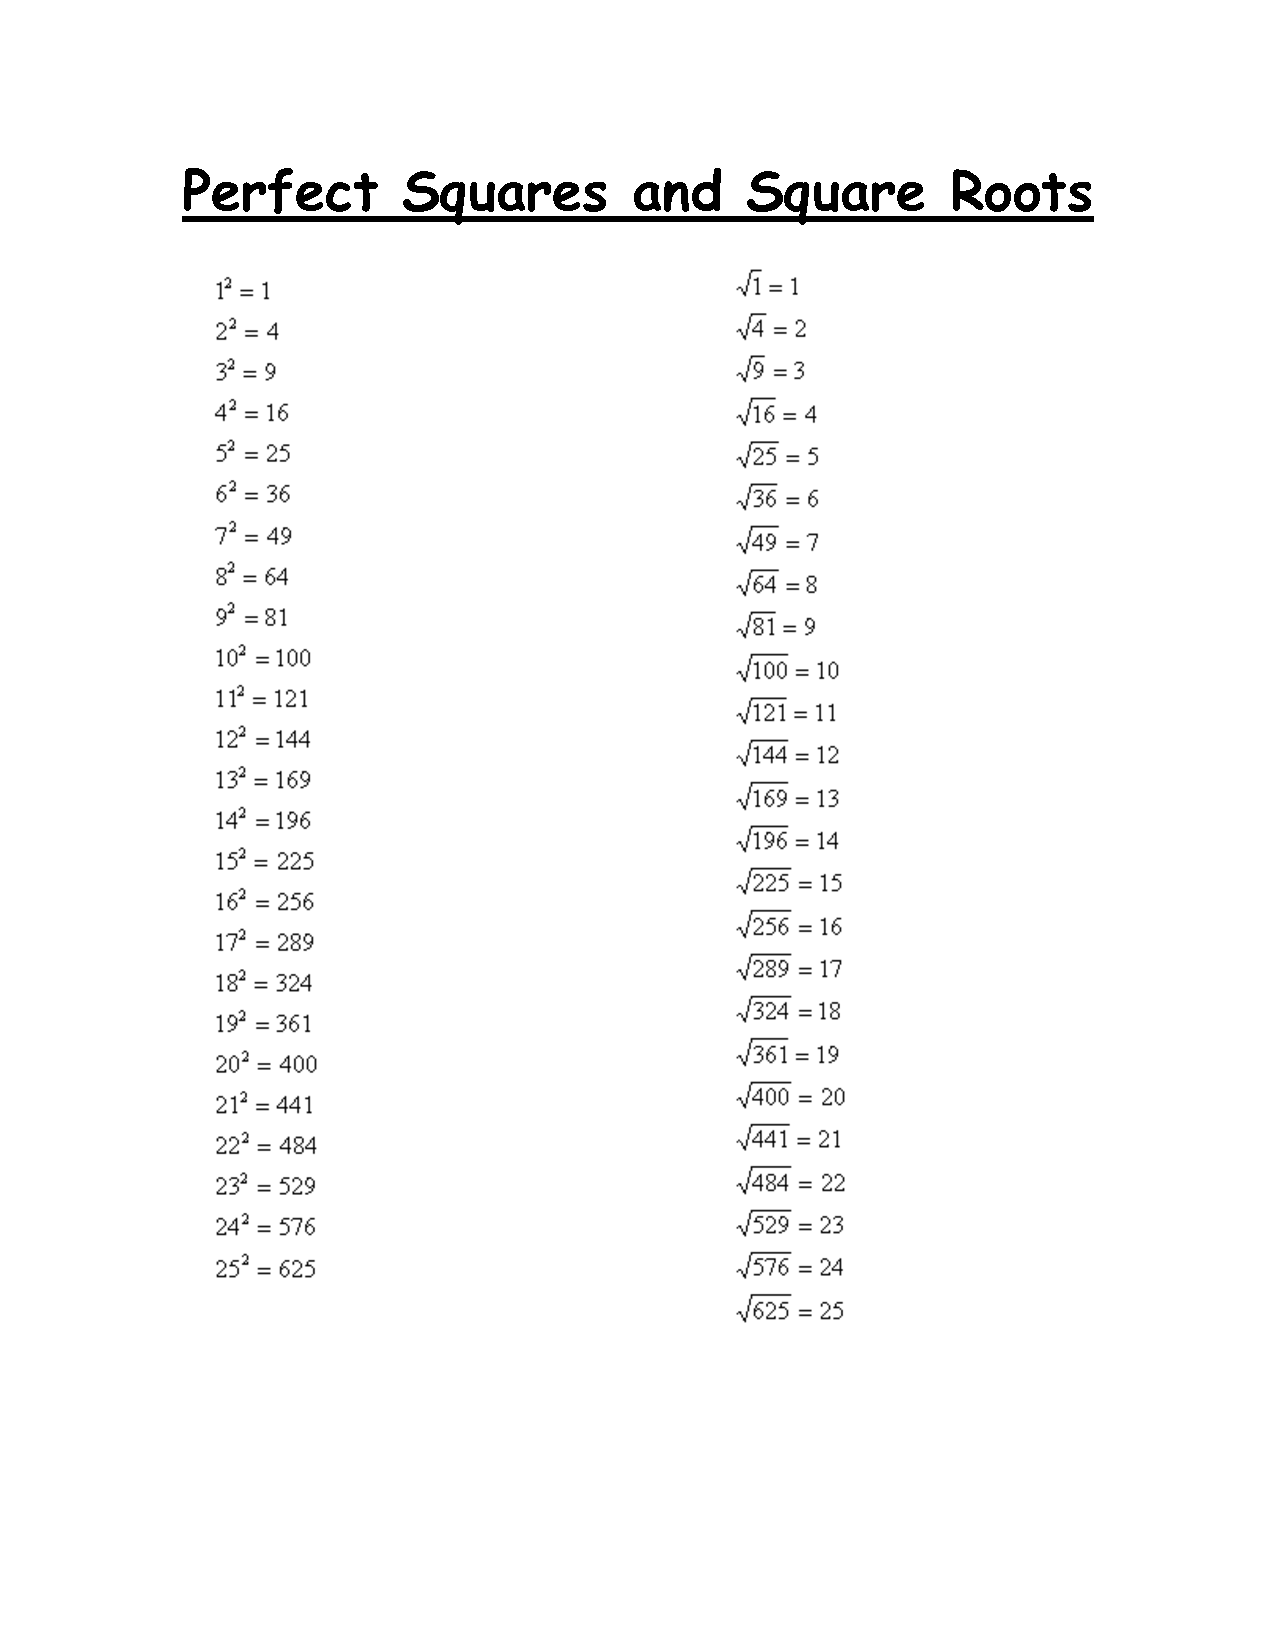 9-best-images-of-perfect-squares-and-square-roots-worksheet-perfect-square-roots-worksheet